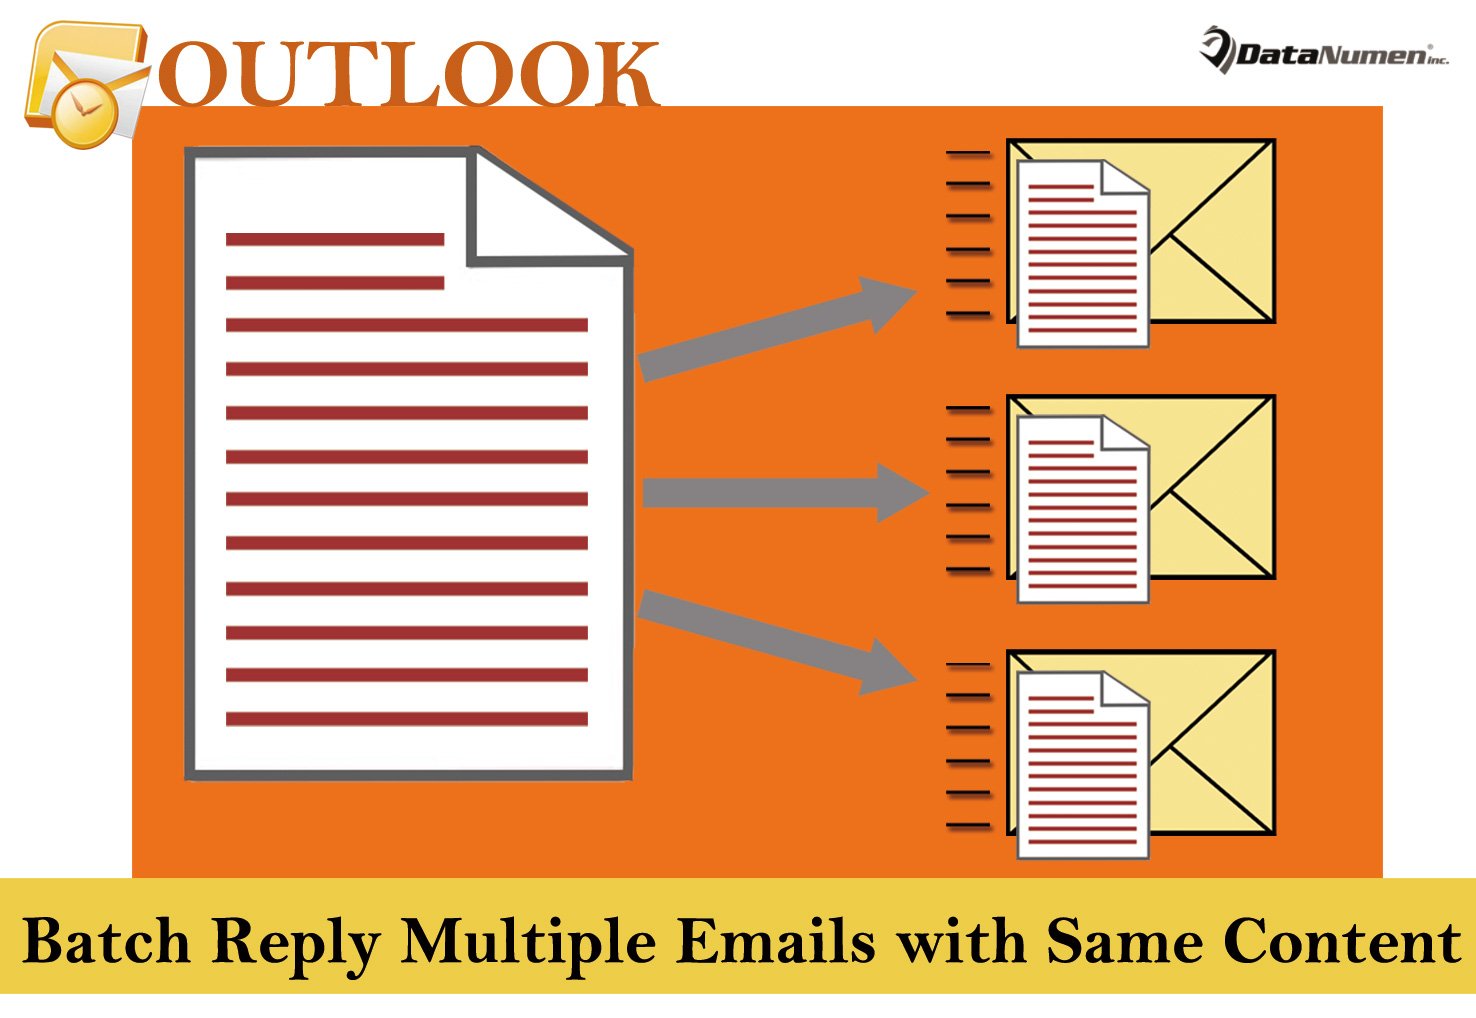 Batch Reply Multiple Emails with Same Content in Your Outlook